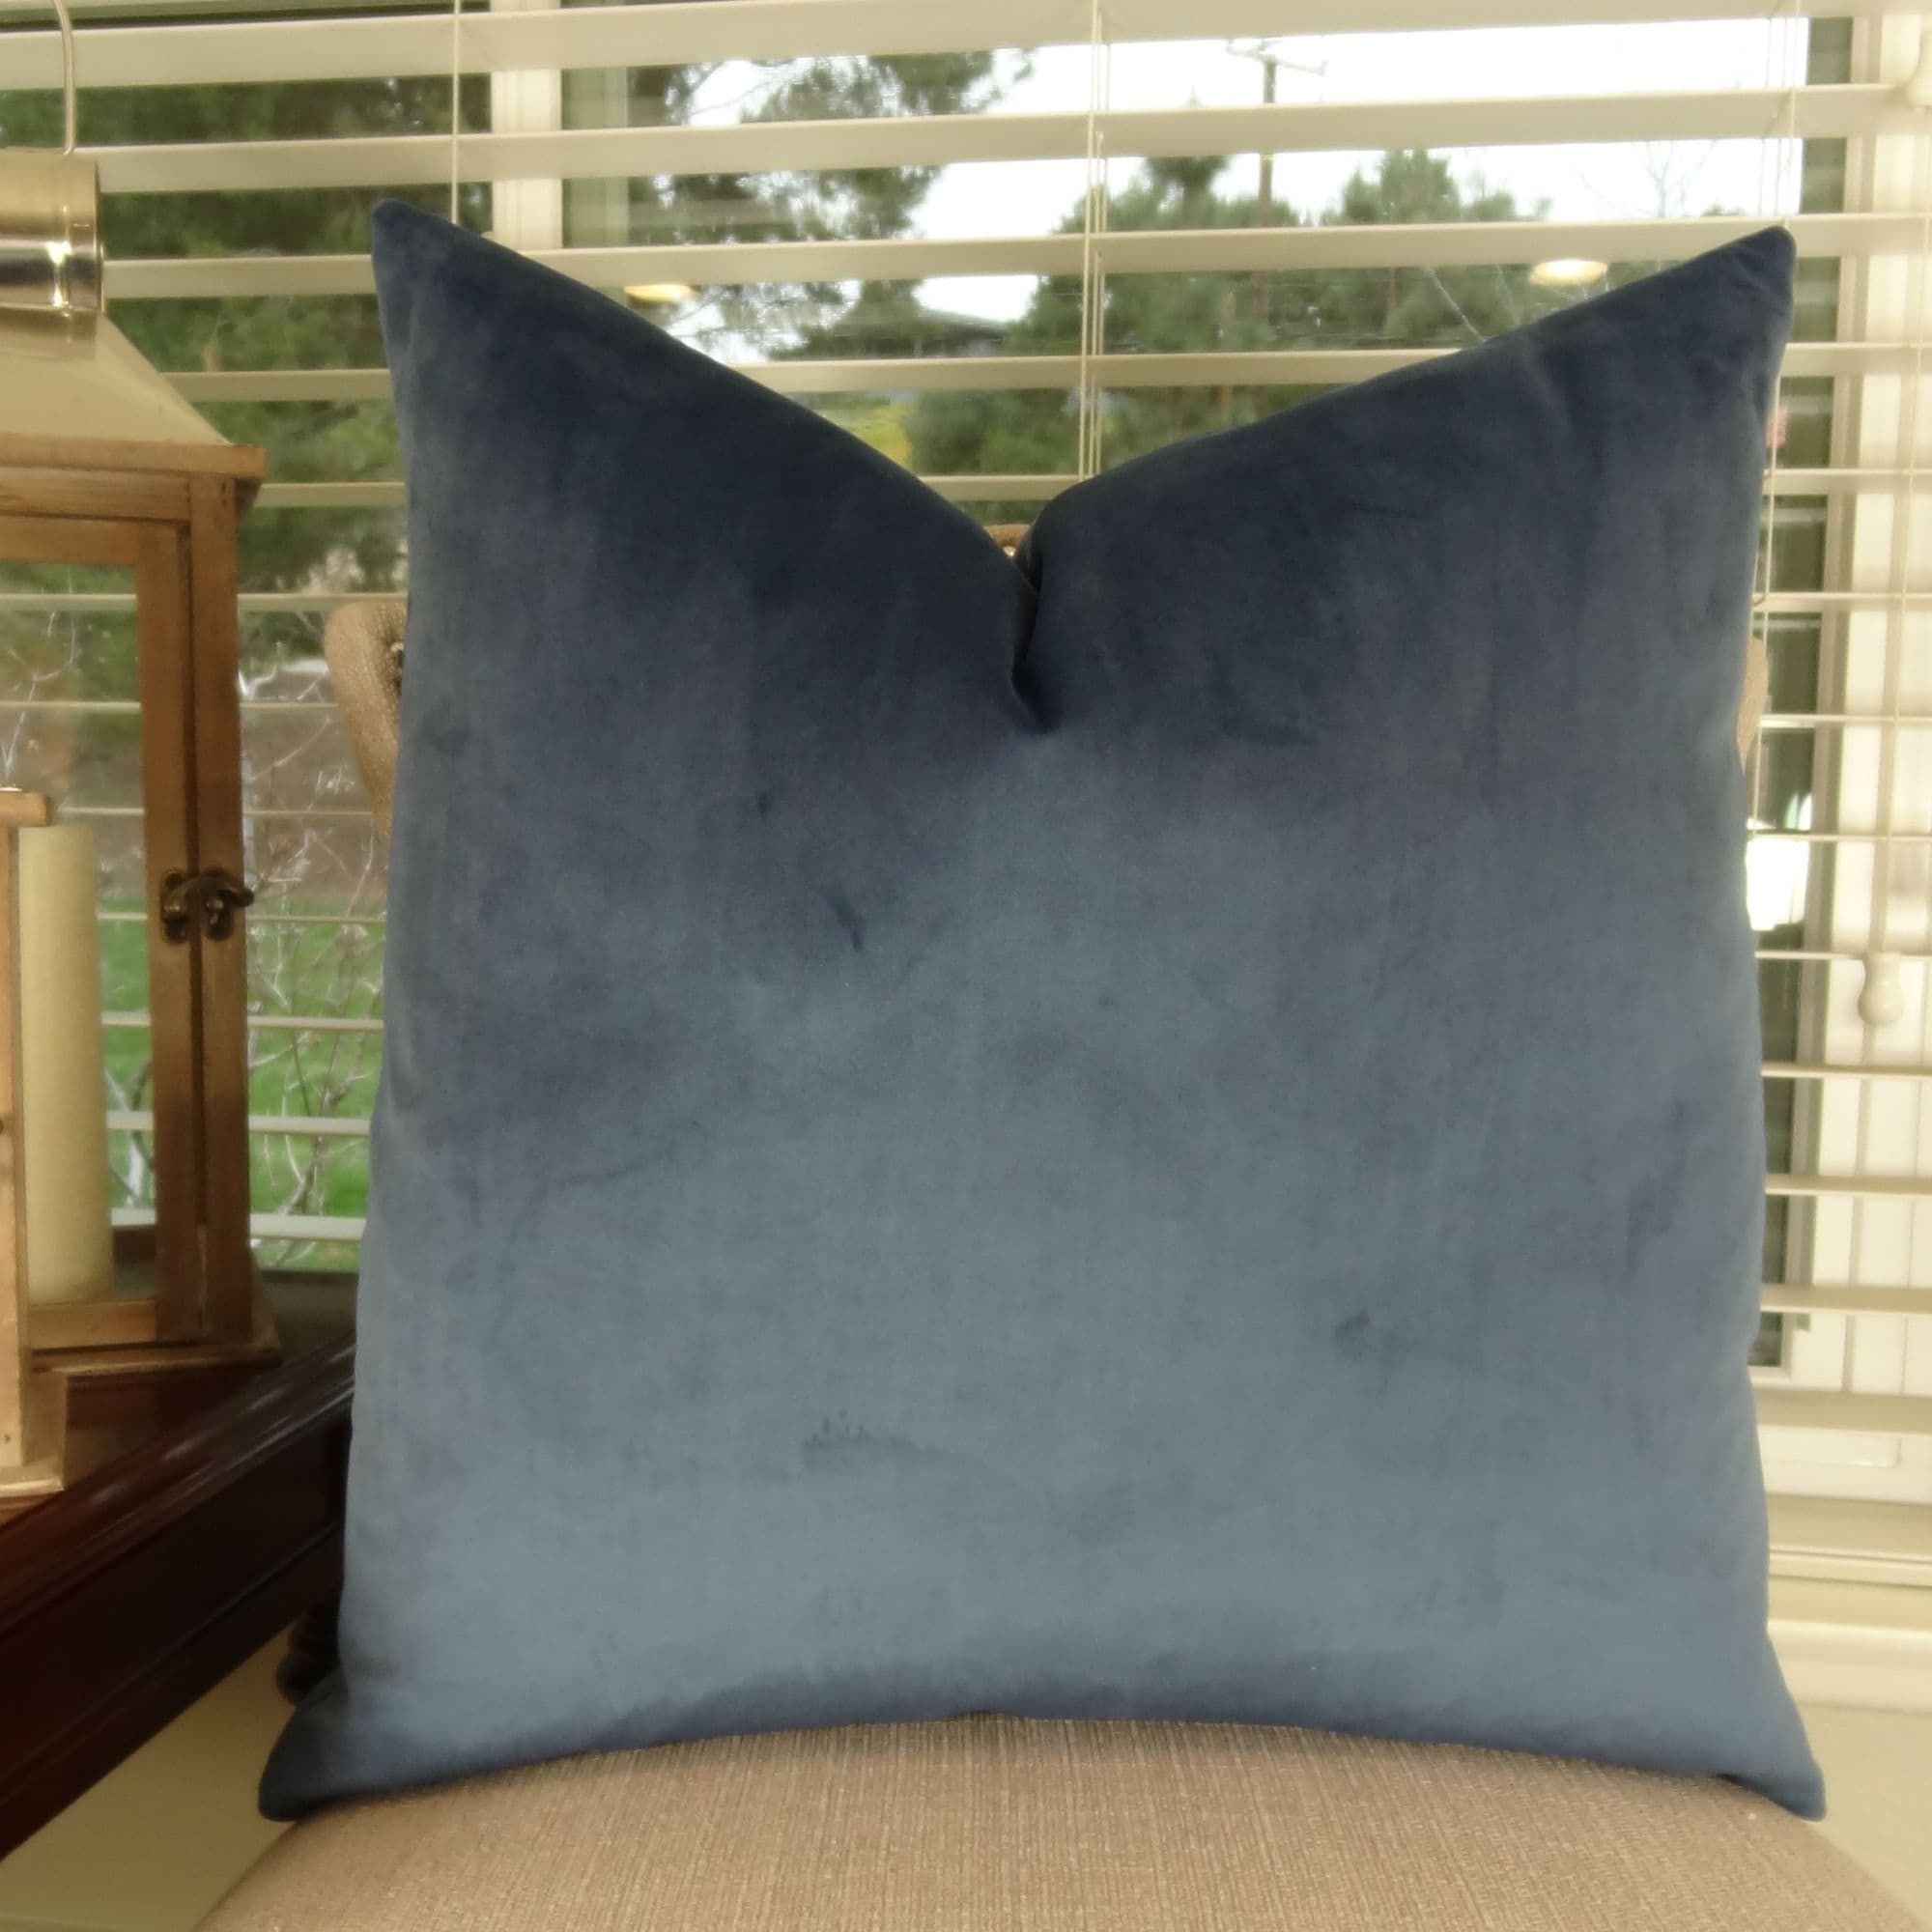 https://ak1.ostkcdn.com/images/products/20896000/Thomas-Collection-Solid-Dark-Blue-Luxury-Throw-Pillow-Handmade-in-USA-15003D-d7b75ace-ef2e-458f-a2c3-f7b773fb29ae.jpg